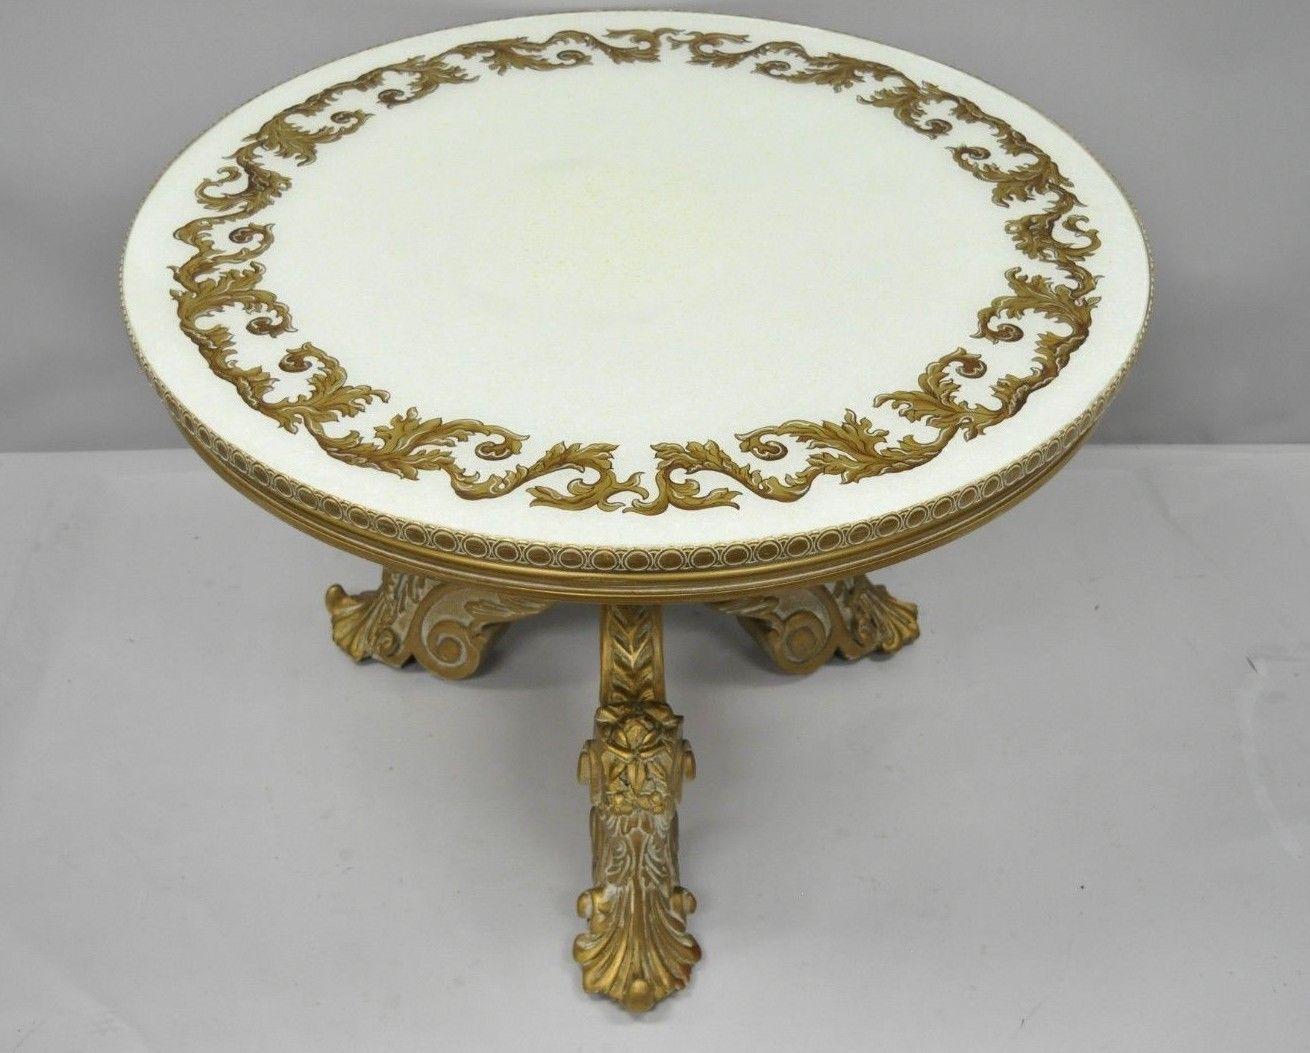 Antique French Rococo Baroque Style gold Italian round tall coffee table. Item features solid wood carved pedestal base, gold gilt hand-painted glass top with rainbow color and unique tall form. circa mid-20th century. Measurements: 25